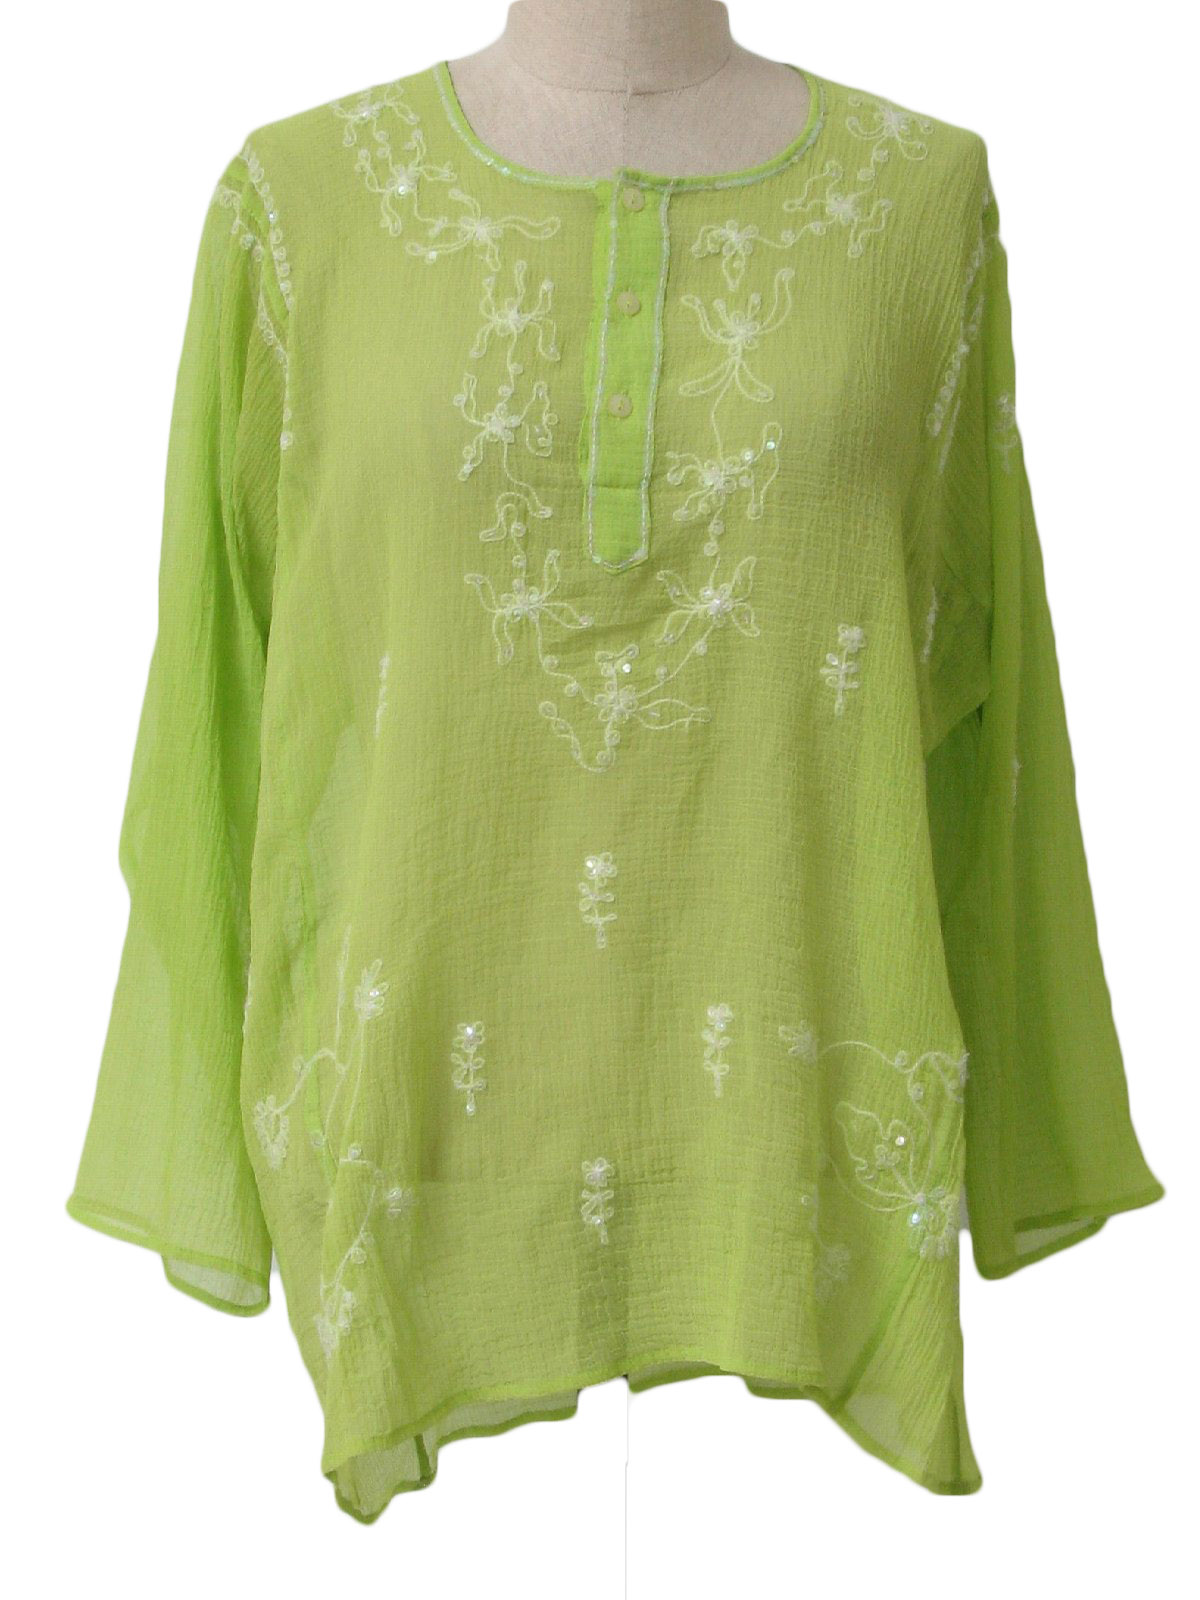 Retro 70s Hippie Shirt (Sweet Lady) : 70s style (made recently) -Sweet ...